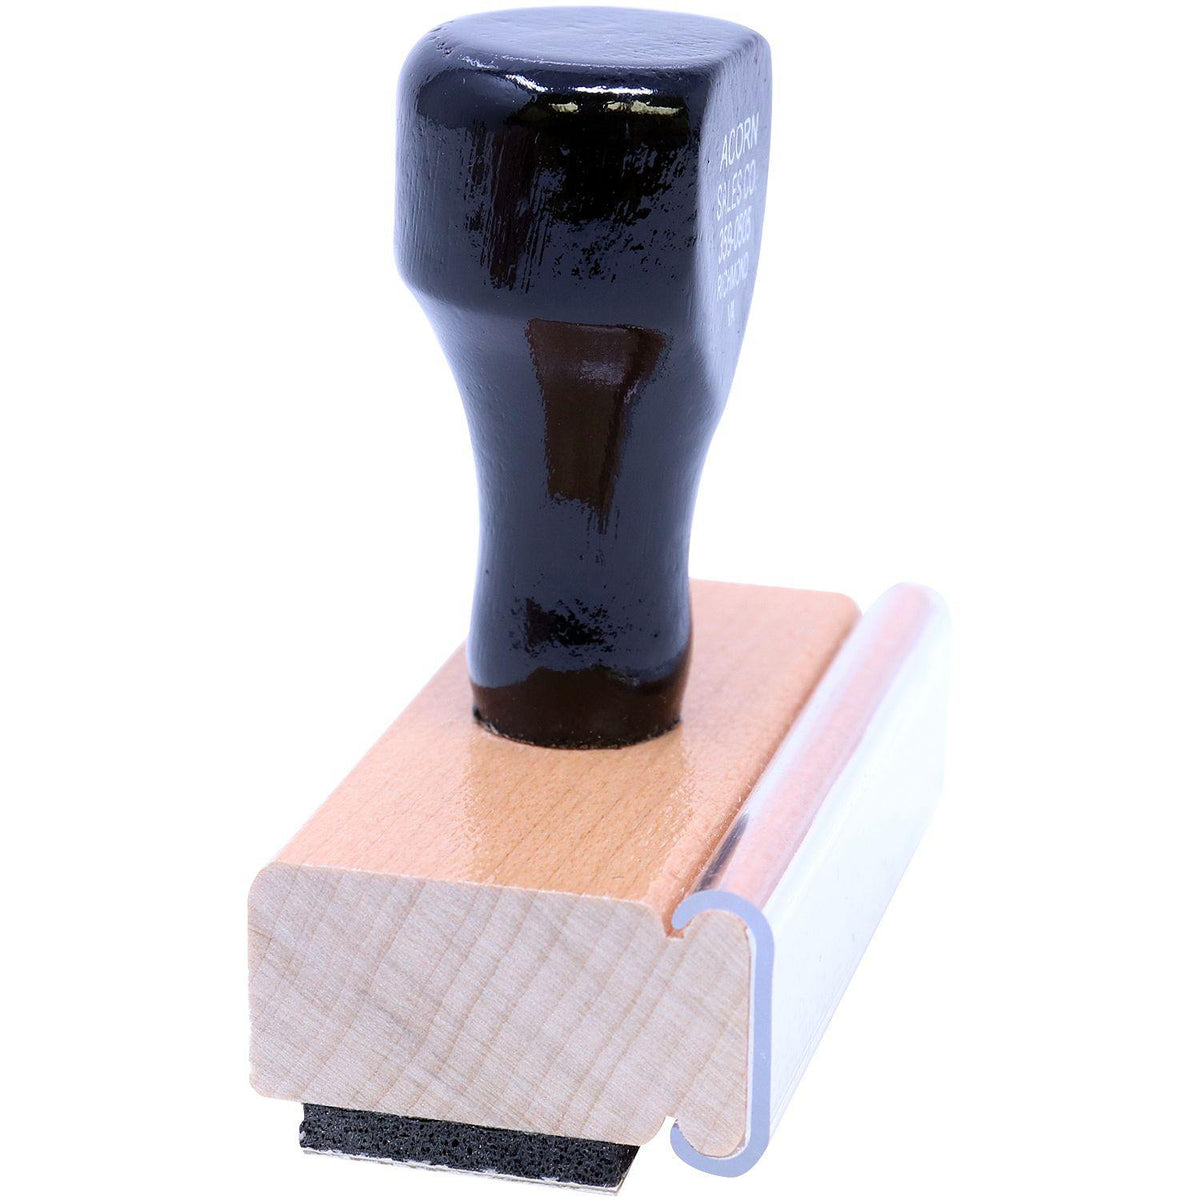 Side View of Large Great Improvement Rubber Stamp at an Angle